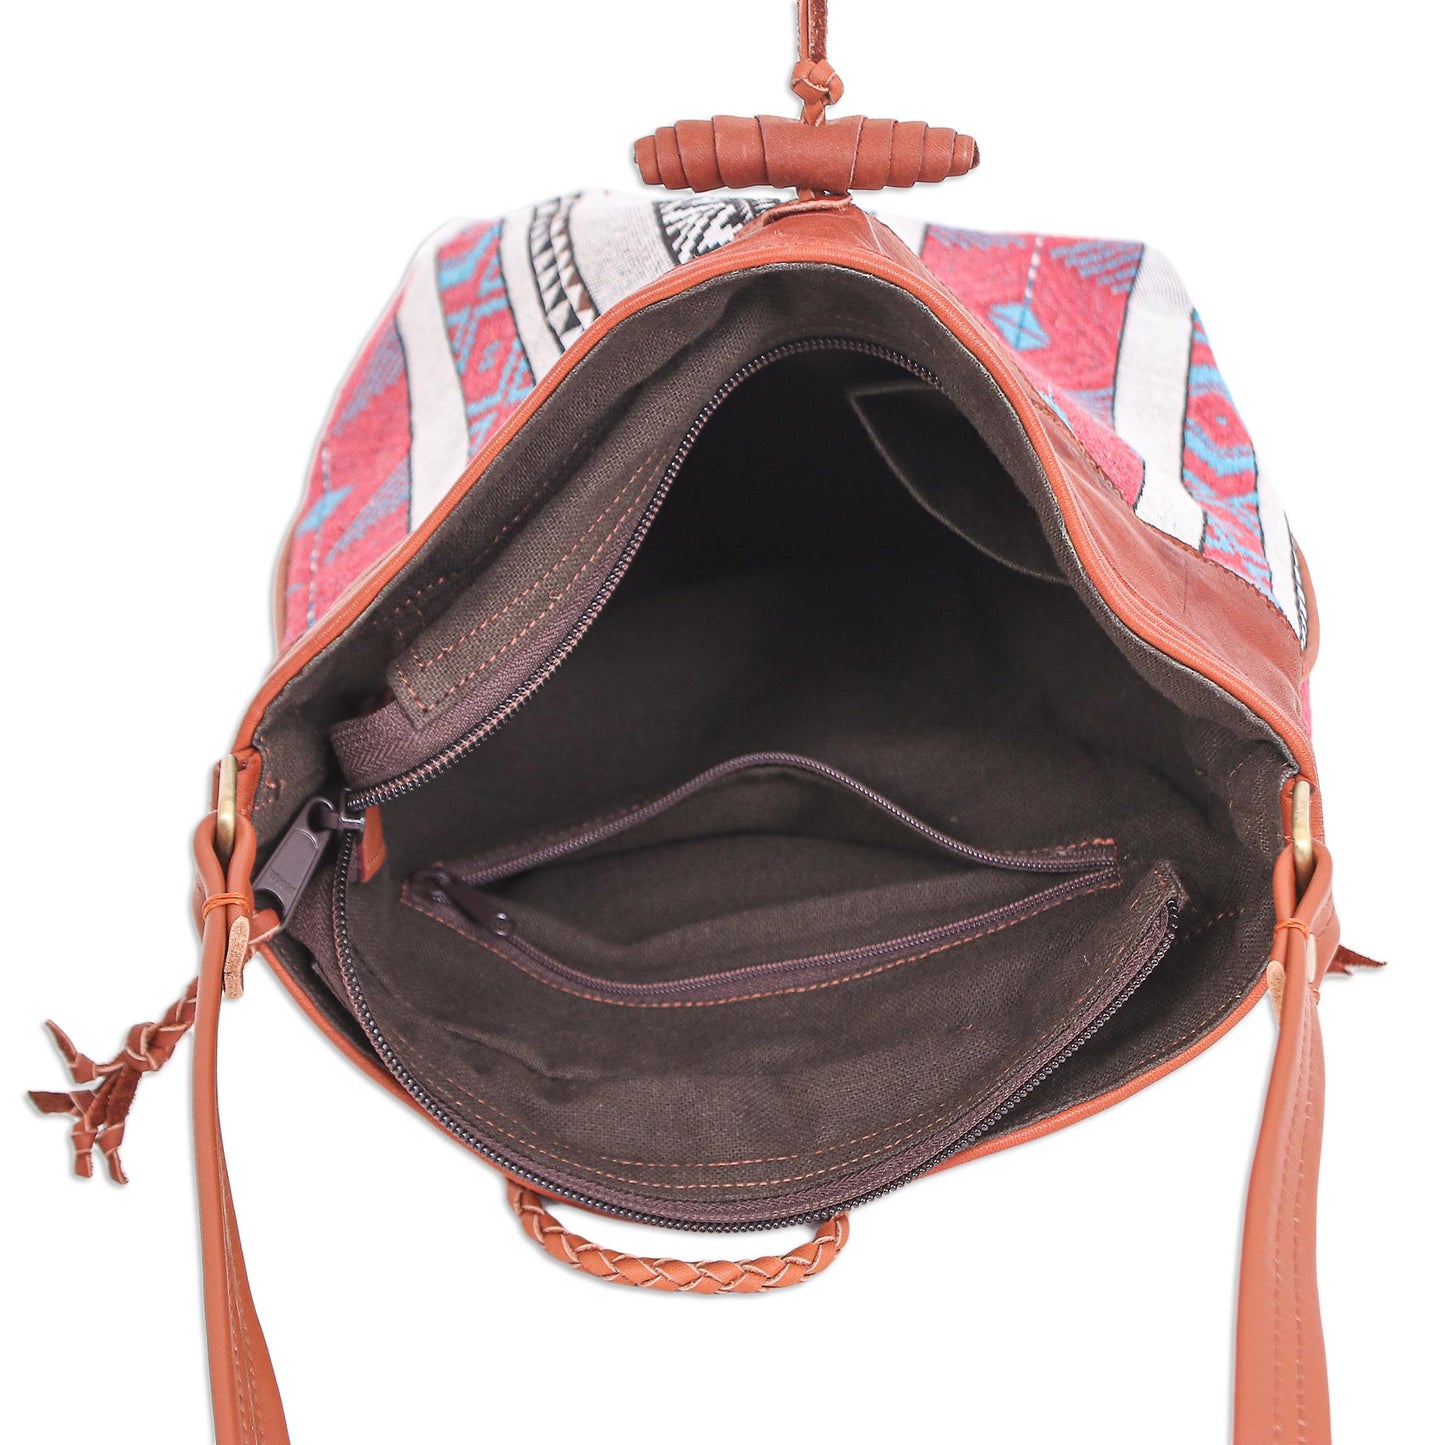 Joyful Journey in Red Patchwork Cotton Blend Sling Bag from Thailand